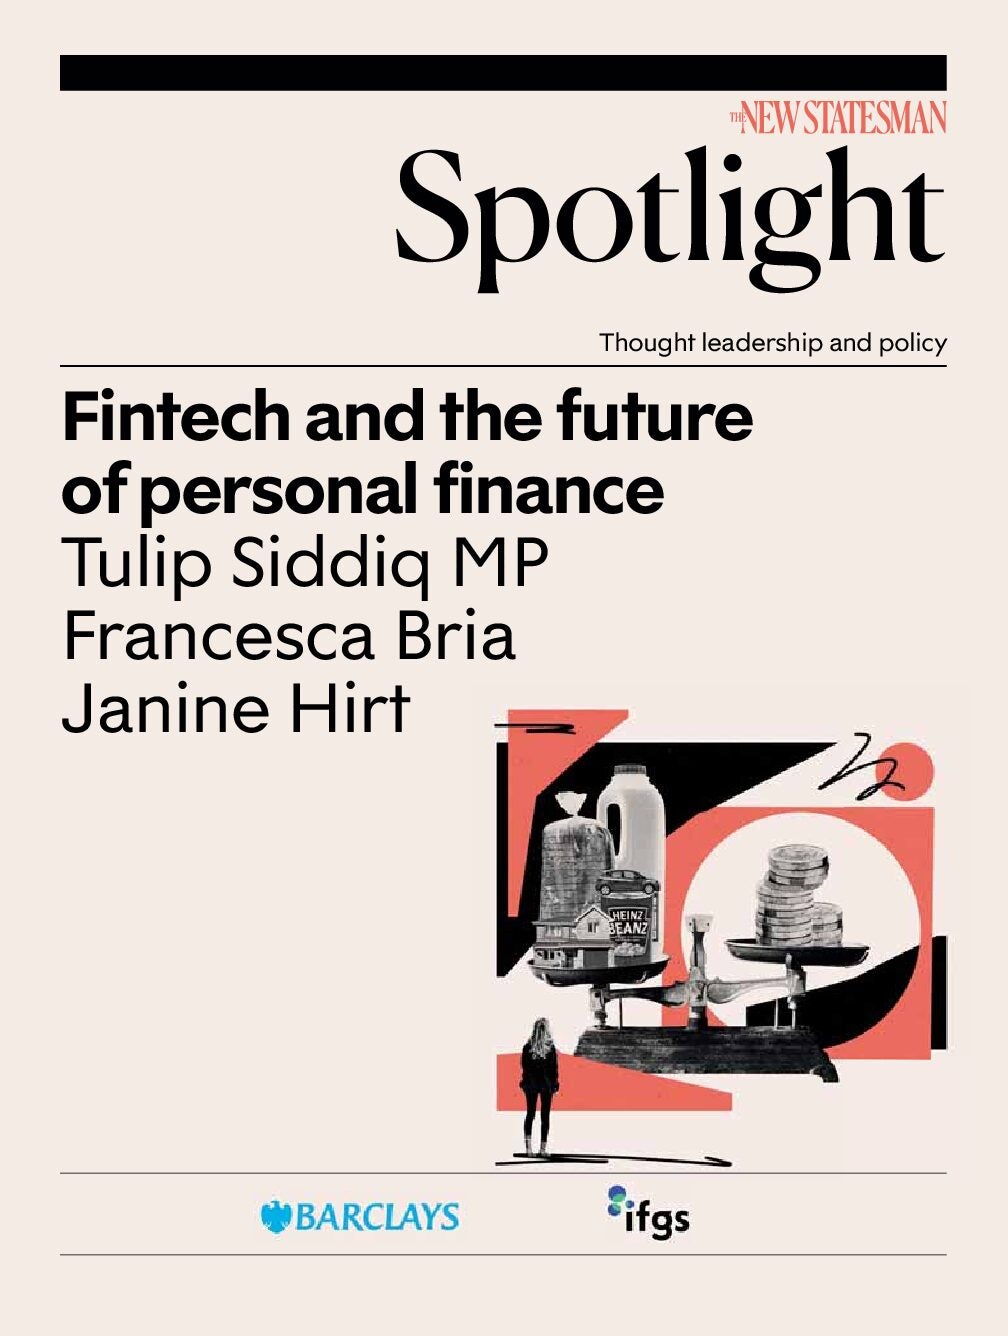 Fintech and the future of personal finance